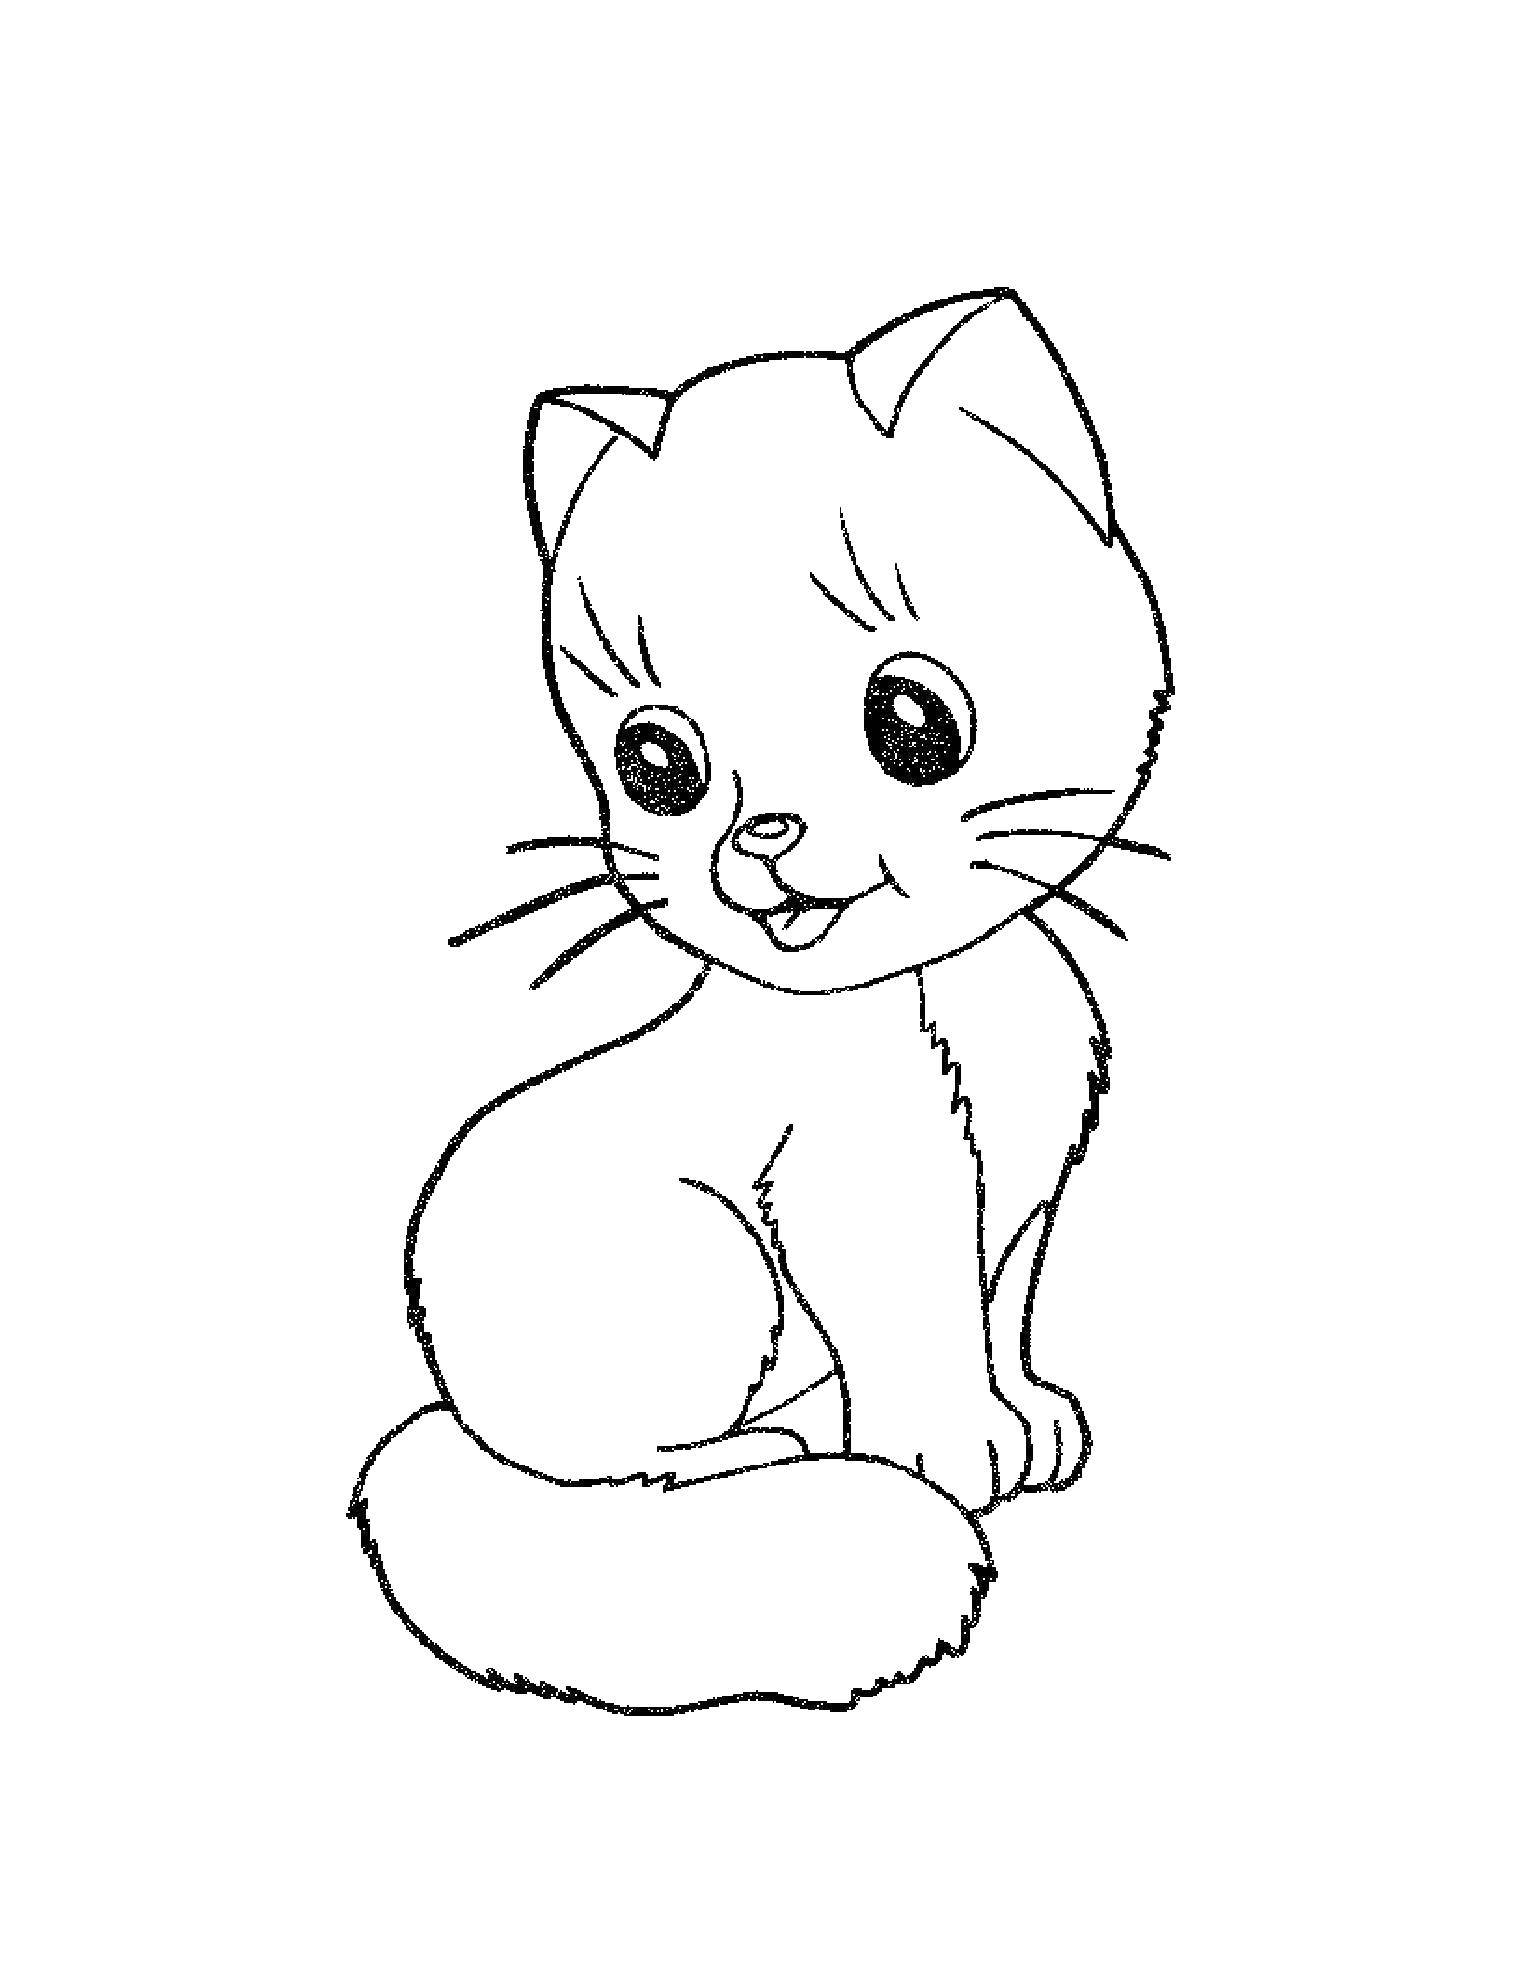 Coloring Kitten with mustache. Category seals. Tags:  kitten, eyes, mustache.